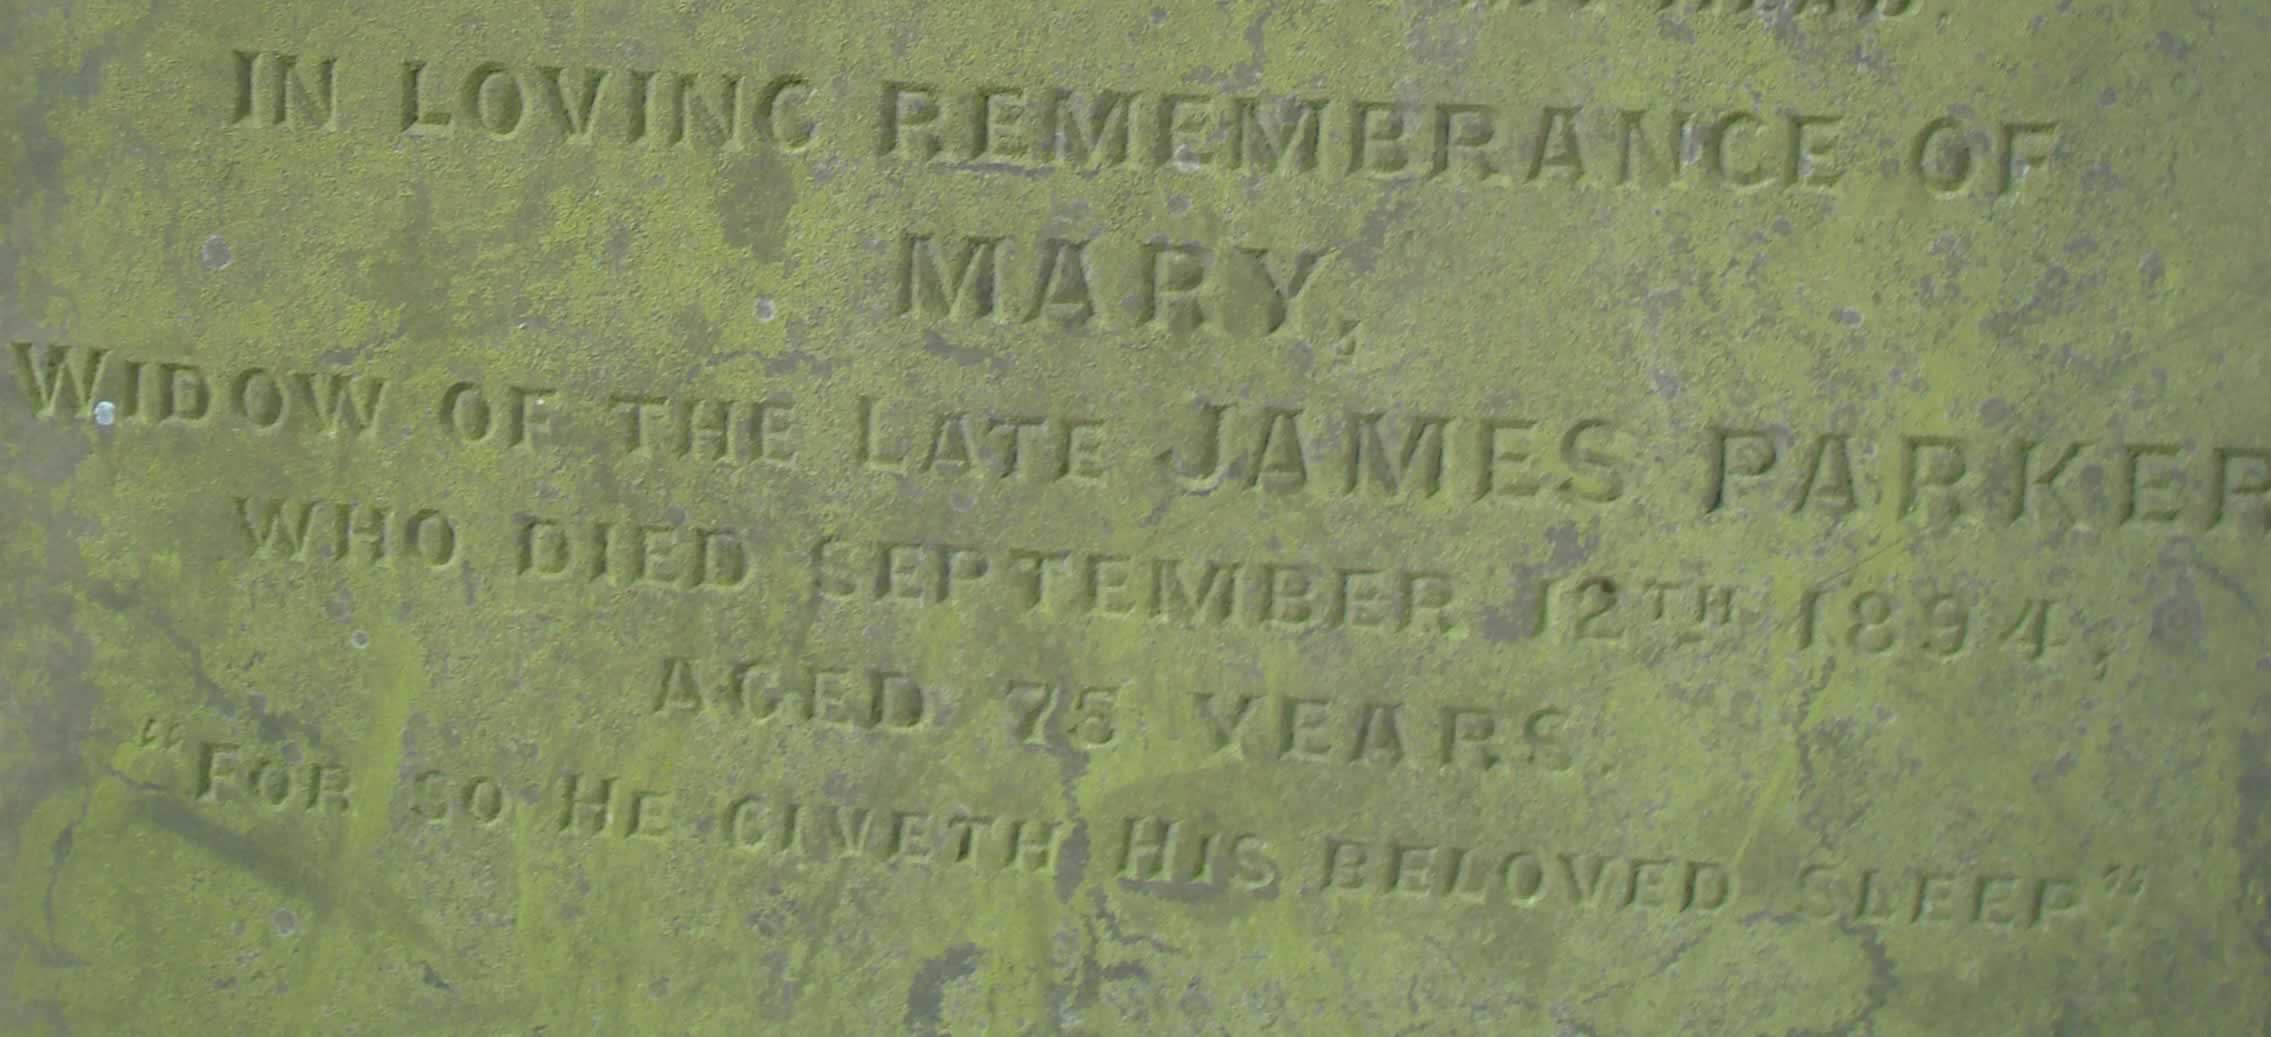 In Loving Remembrance of Mary widow of the late James Parker who died Septmber 12th 1894 aged 75 years. Copyright David Tonks.